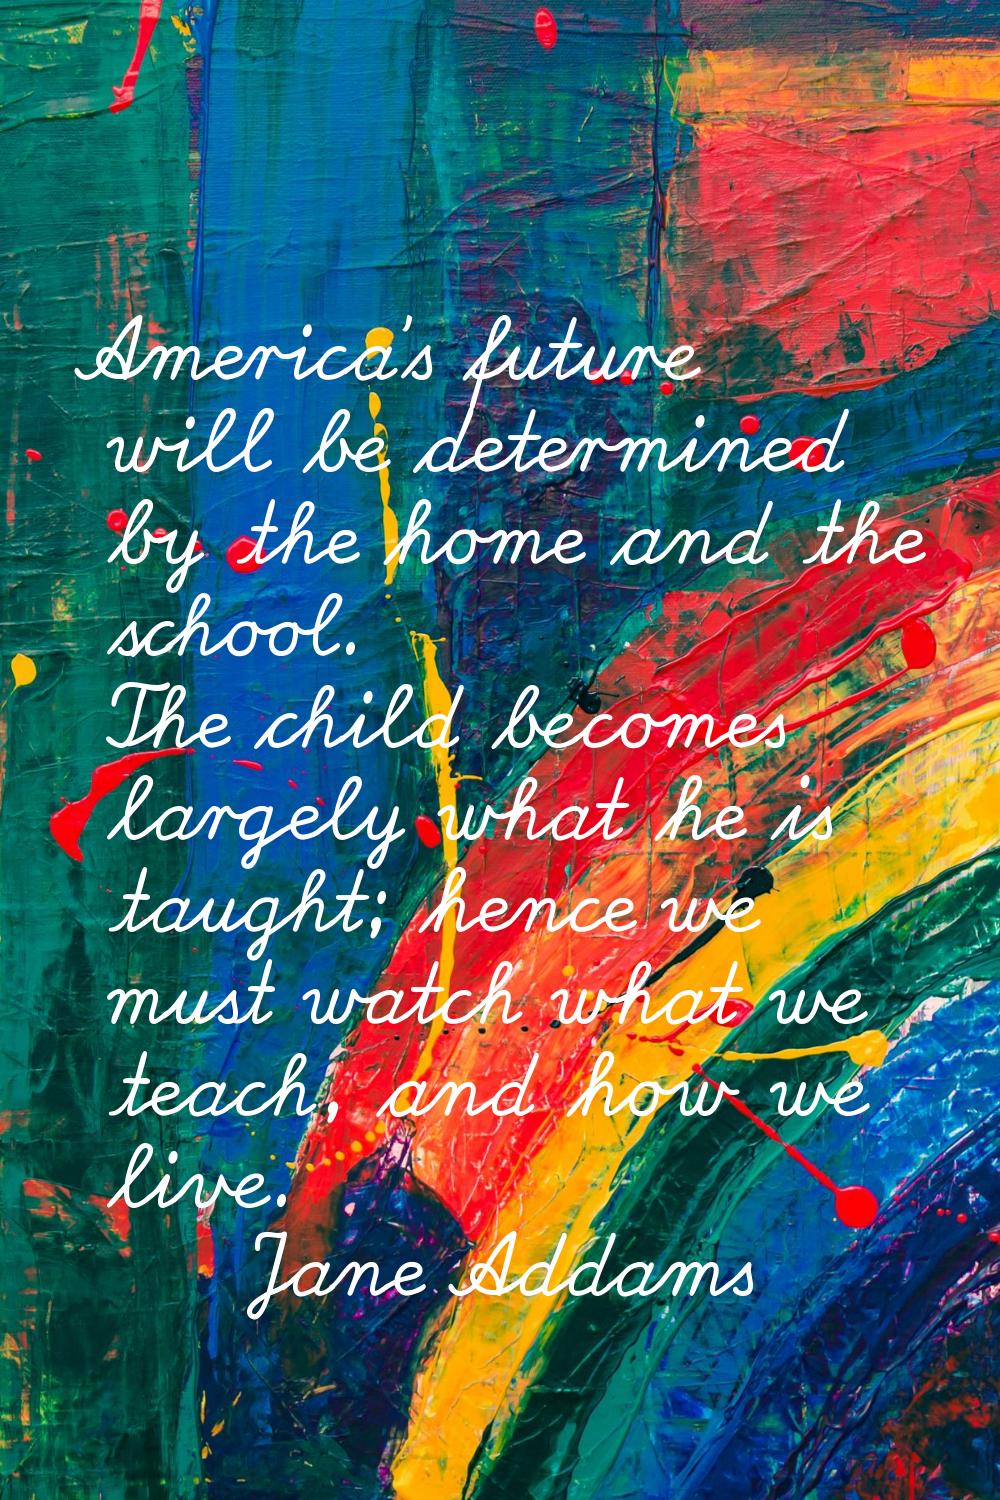 America's future will be determined by the home and the school. The child becomes largely what he i